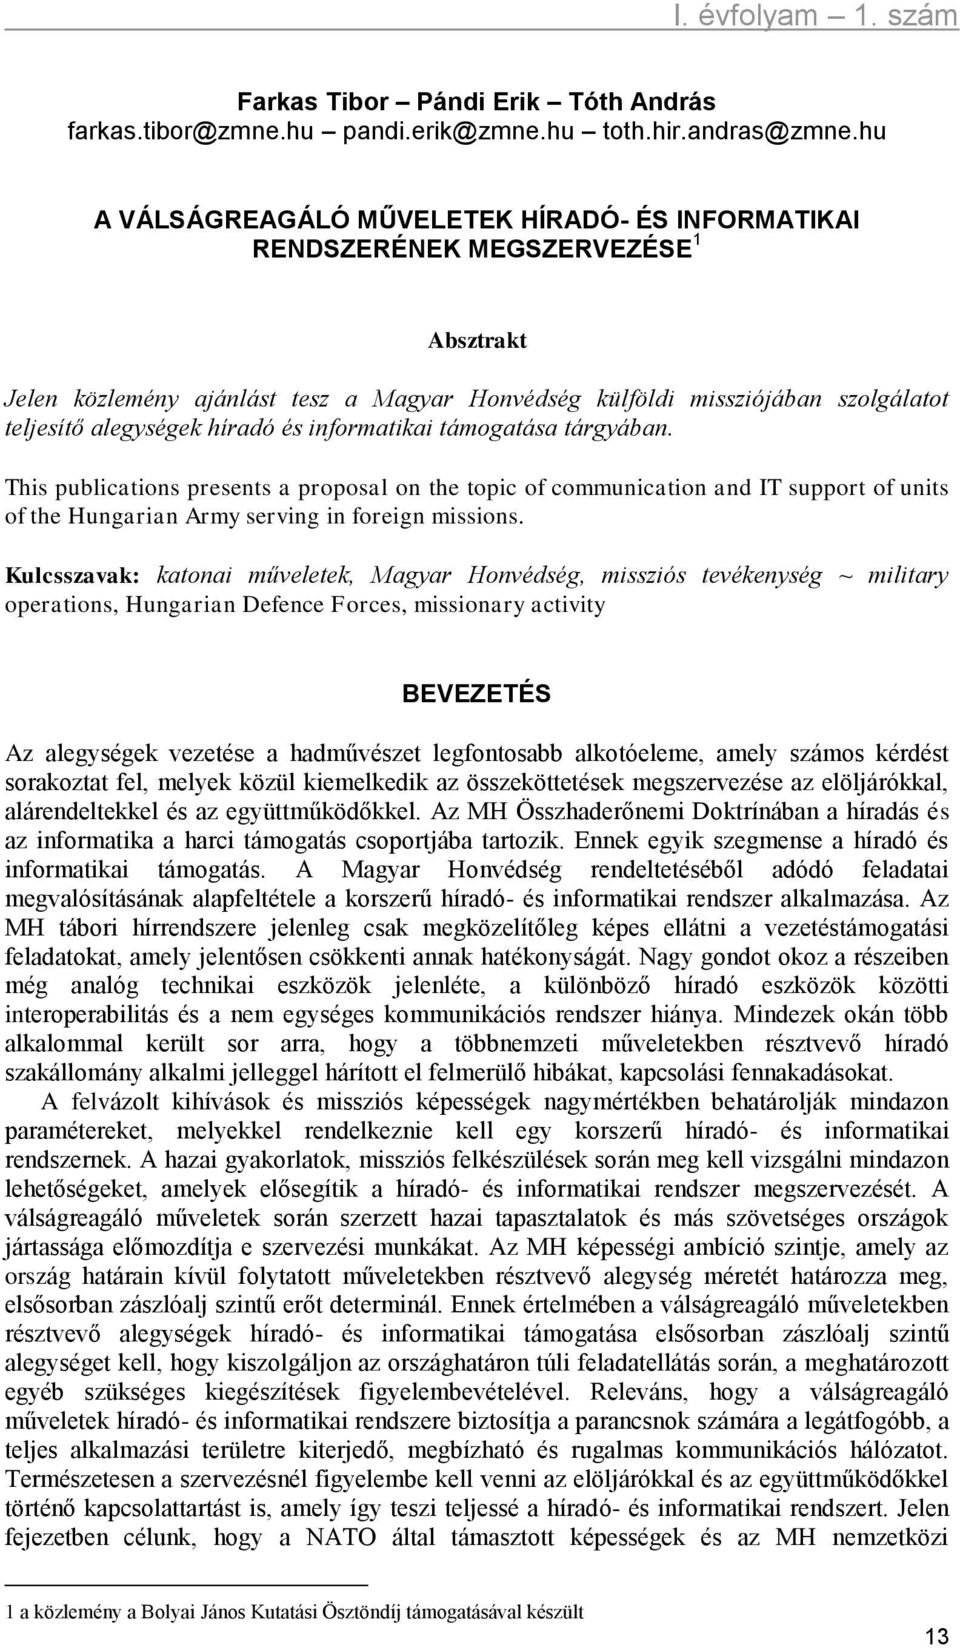 híradó és informatikai támogatása tárgyában. This publications presents a proposal on the topic of communication and IT support of units of the Hungarian Army serving in foreign missions.